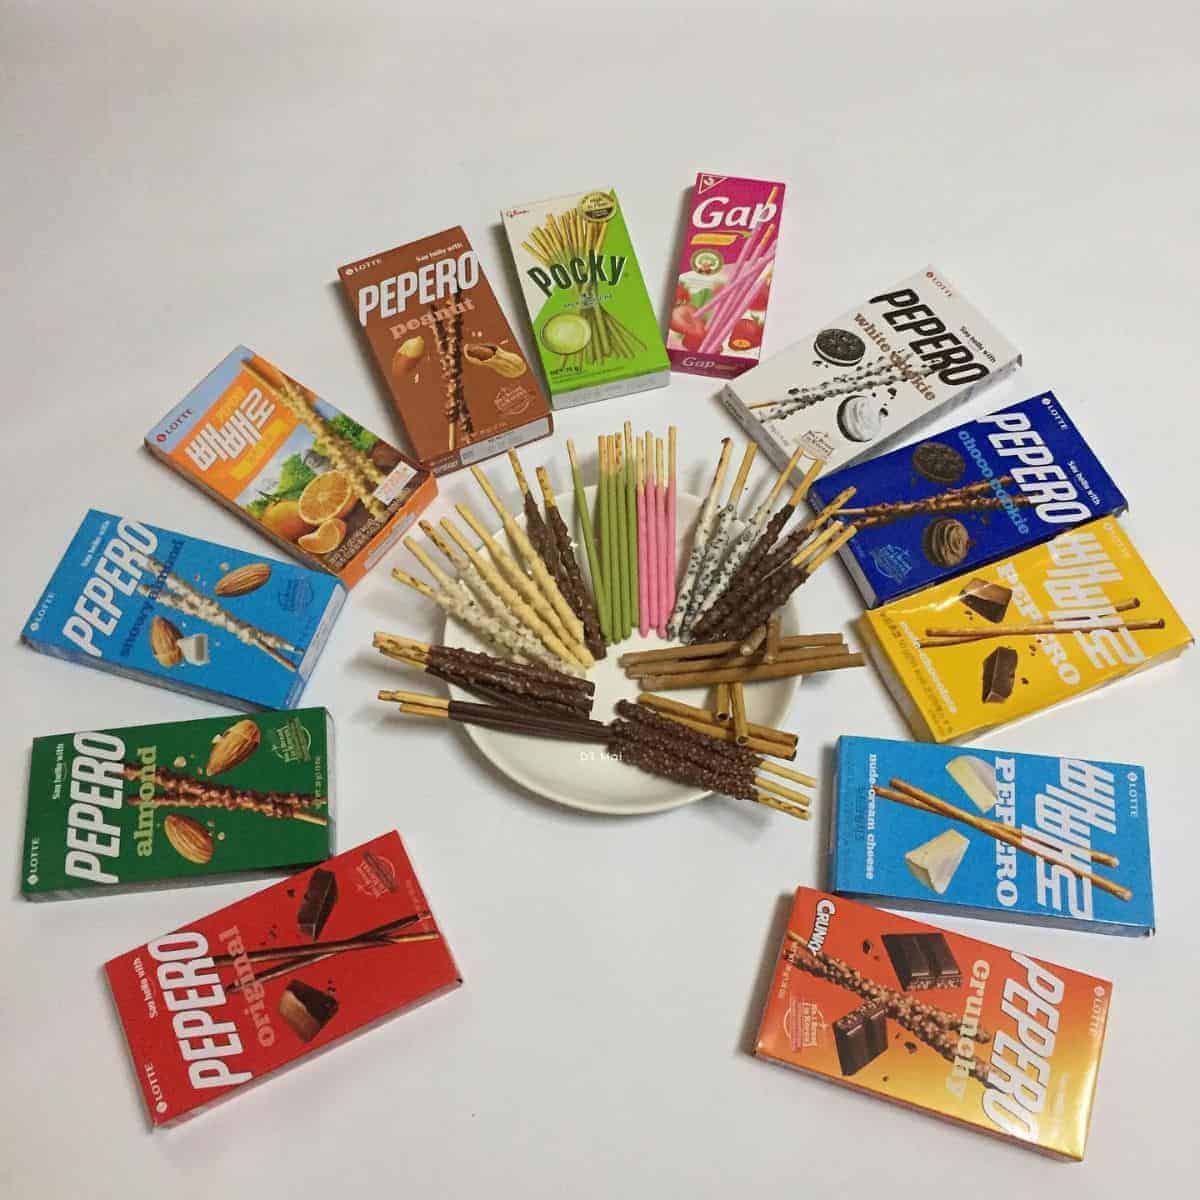 A plate full of Pepero in different flavours encircled by Pepero boxes halal korean snacks